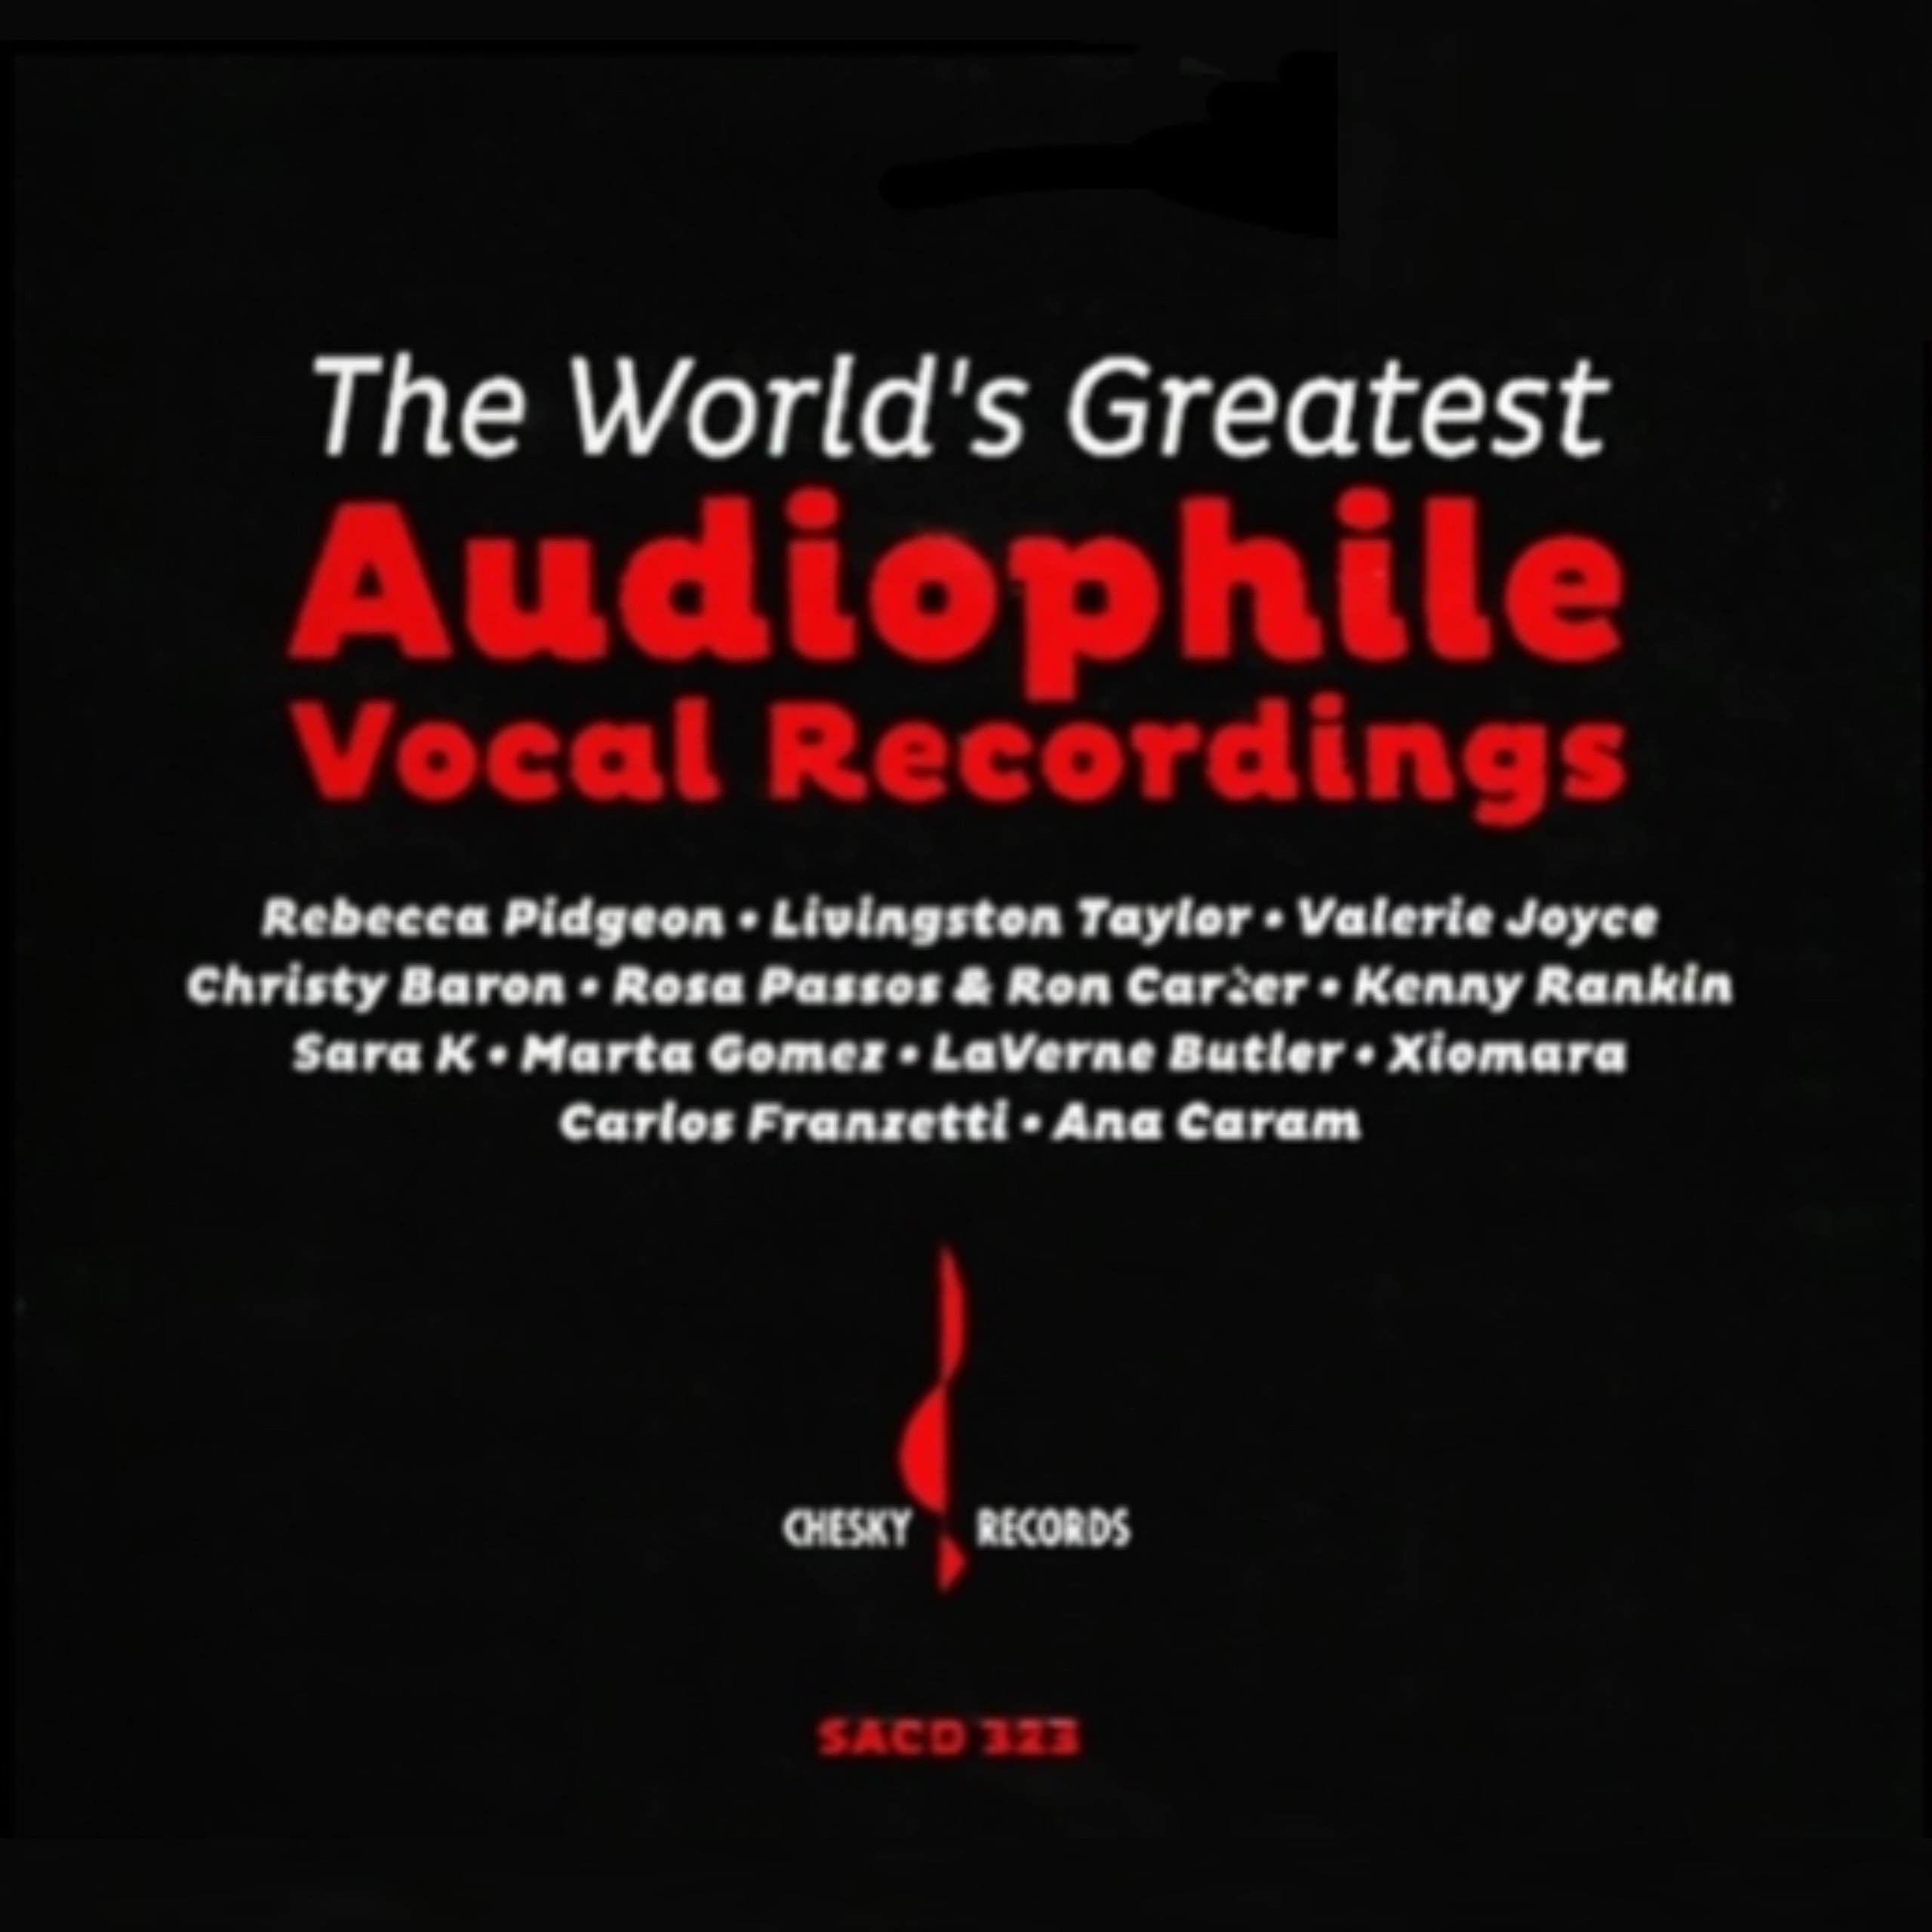 The Worlds Greatest Audiophile Vocal Recordings